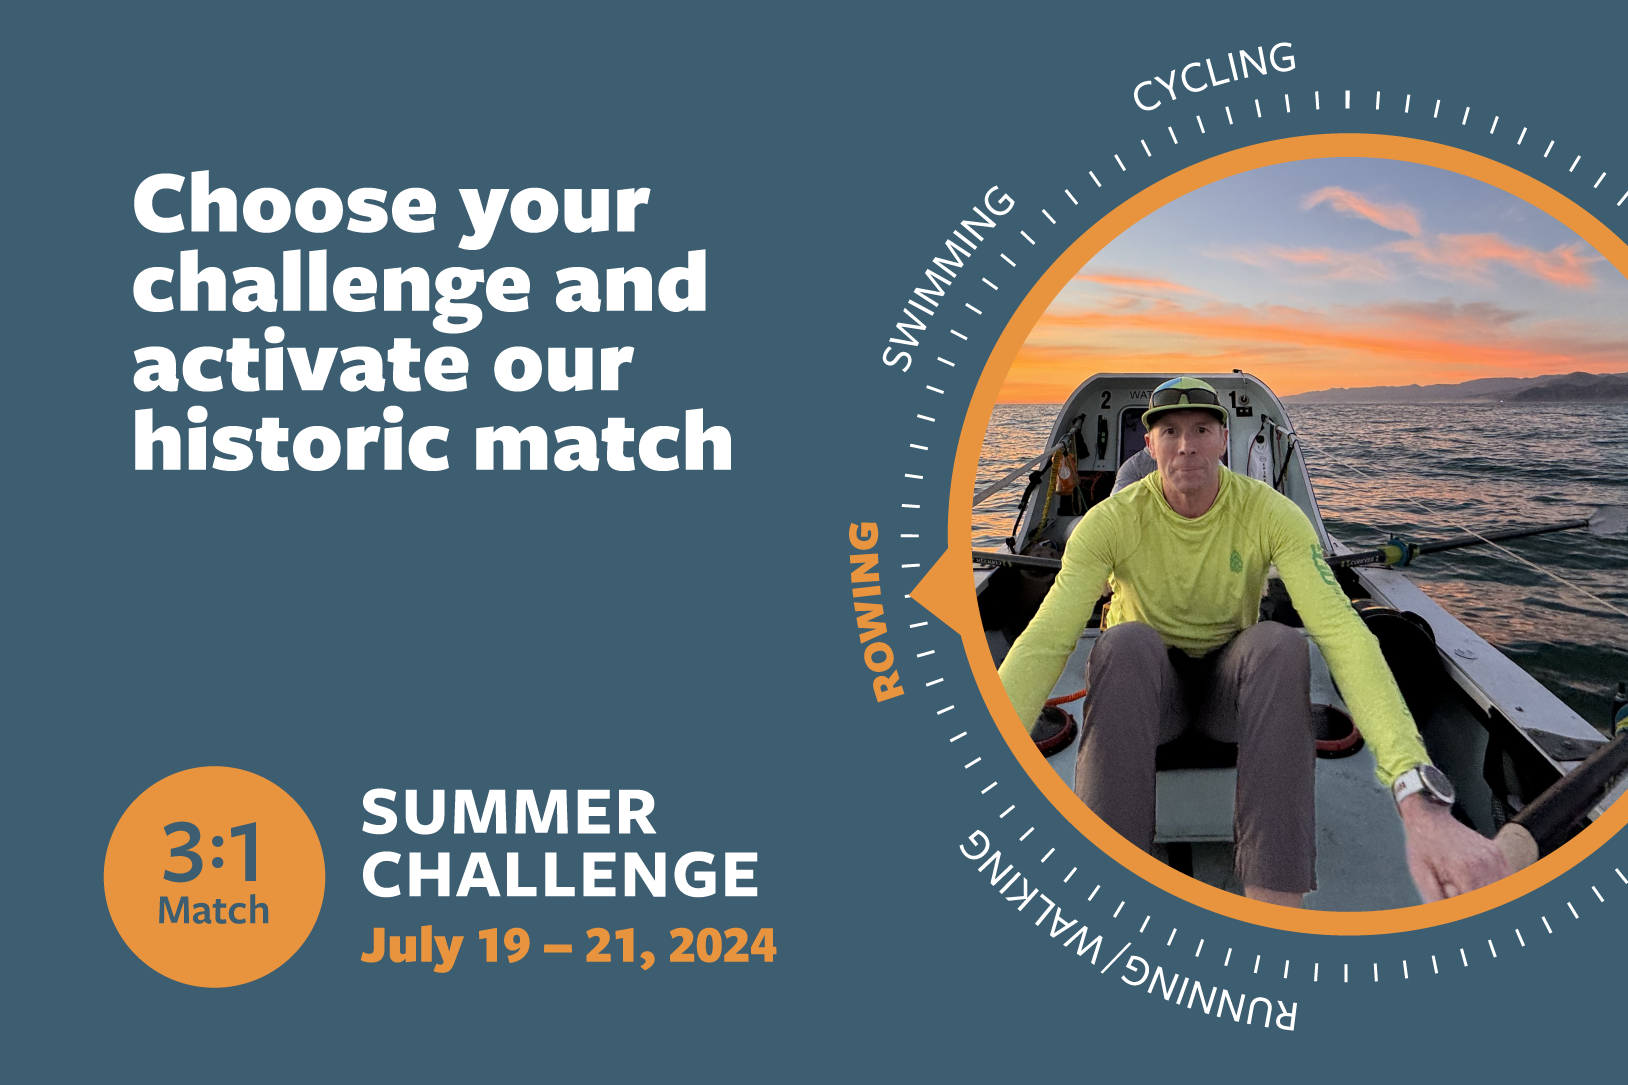 Choose your challenge and activate our historic match. 3:1 Match. Summer Challenge July 19 - 21, 2024